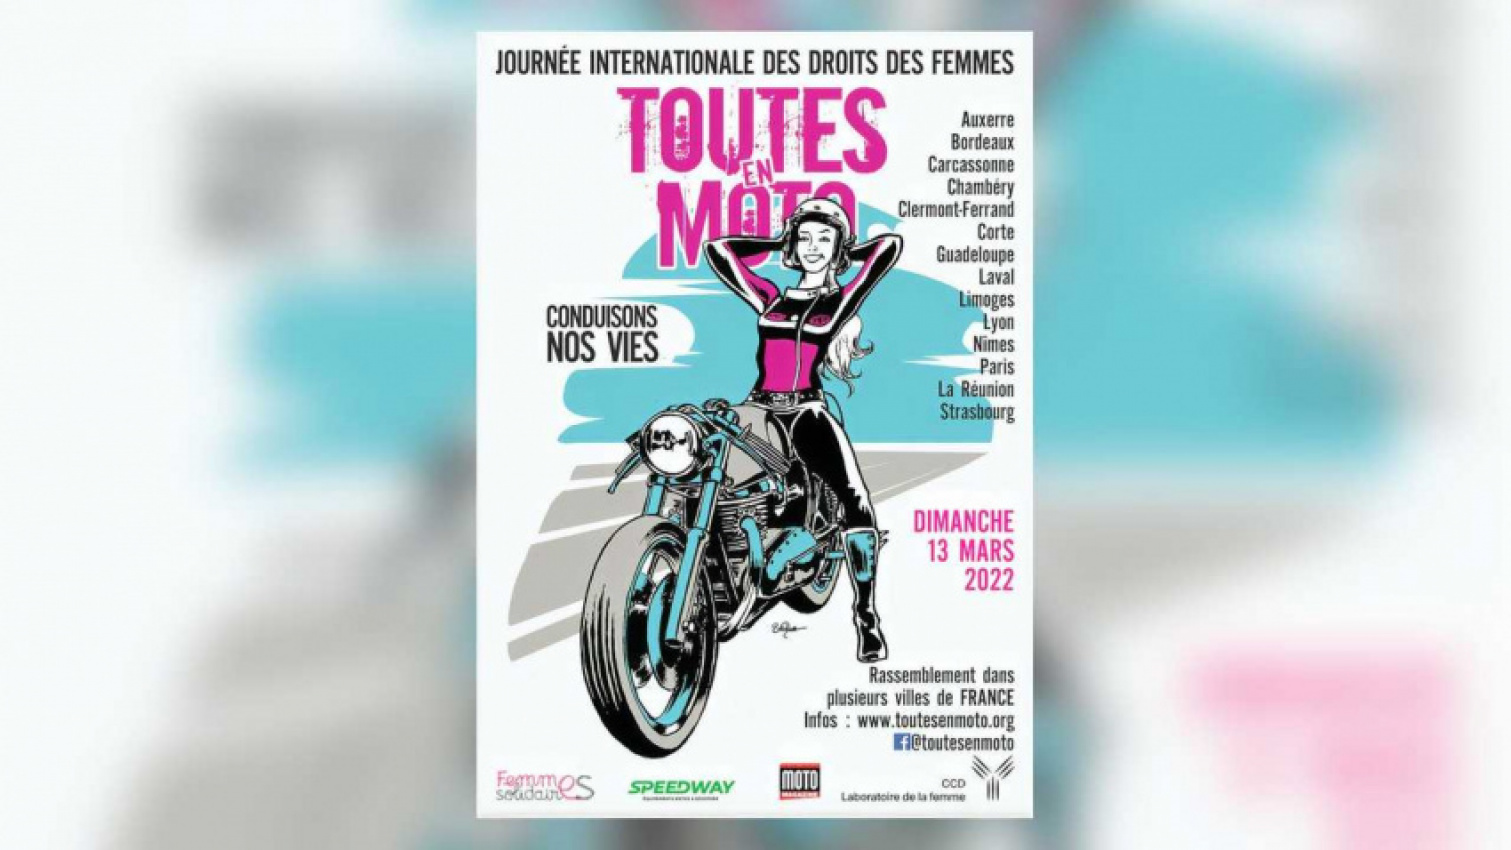 autos, cars, international women's day motorcycle rides expand across france in 2022